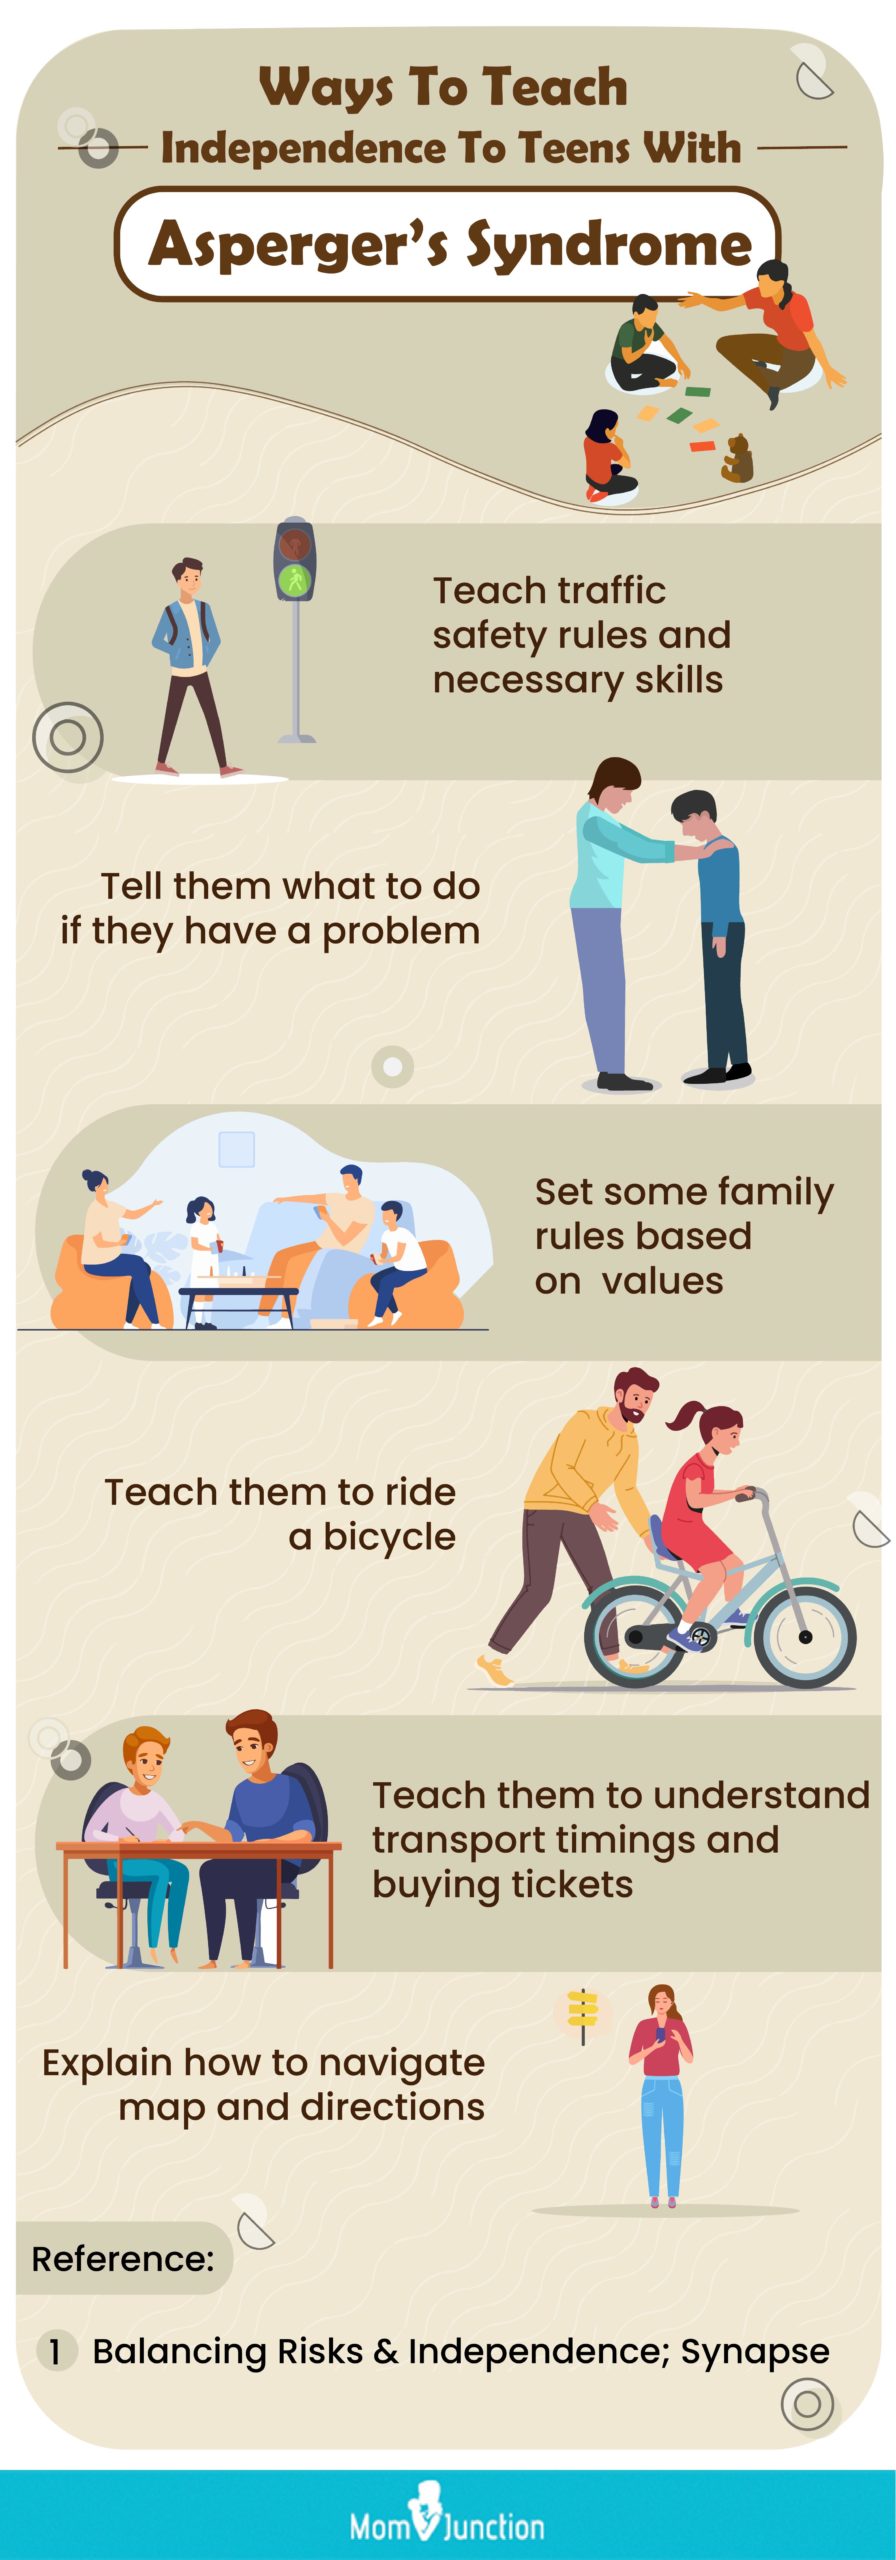 ways to teach independence to teens with asperger’s syndrome [infographic]